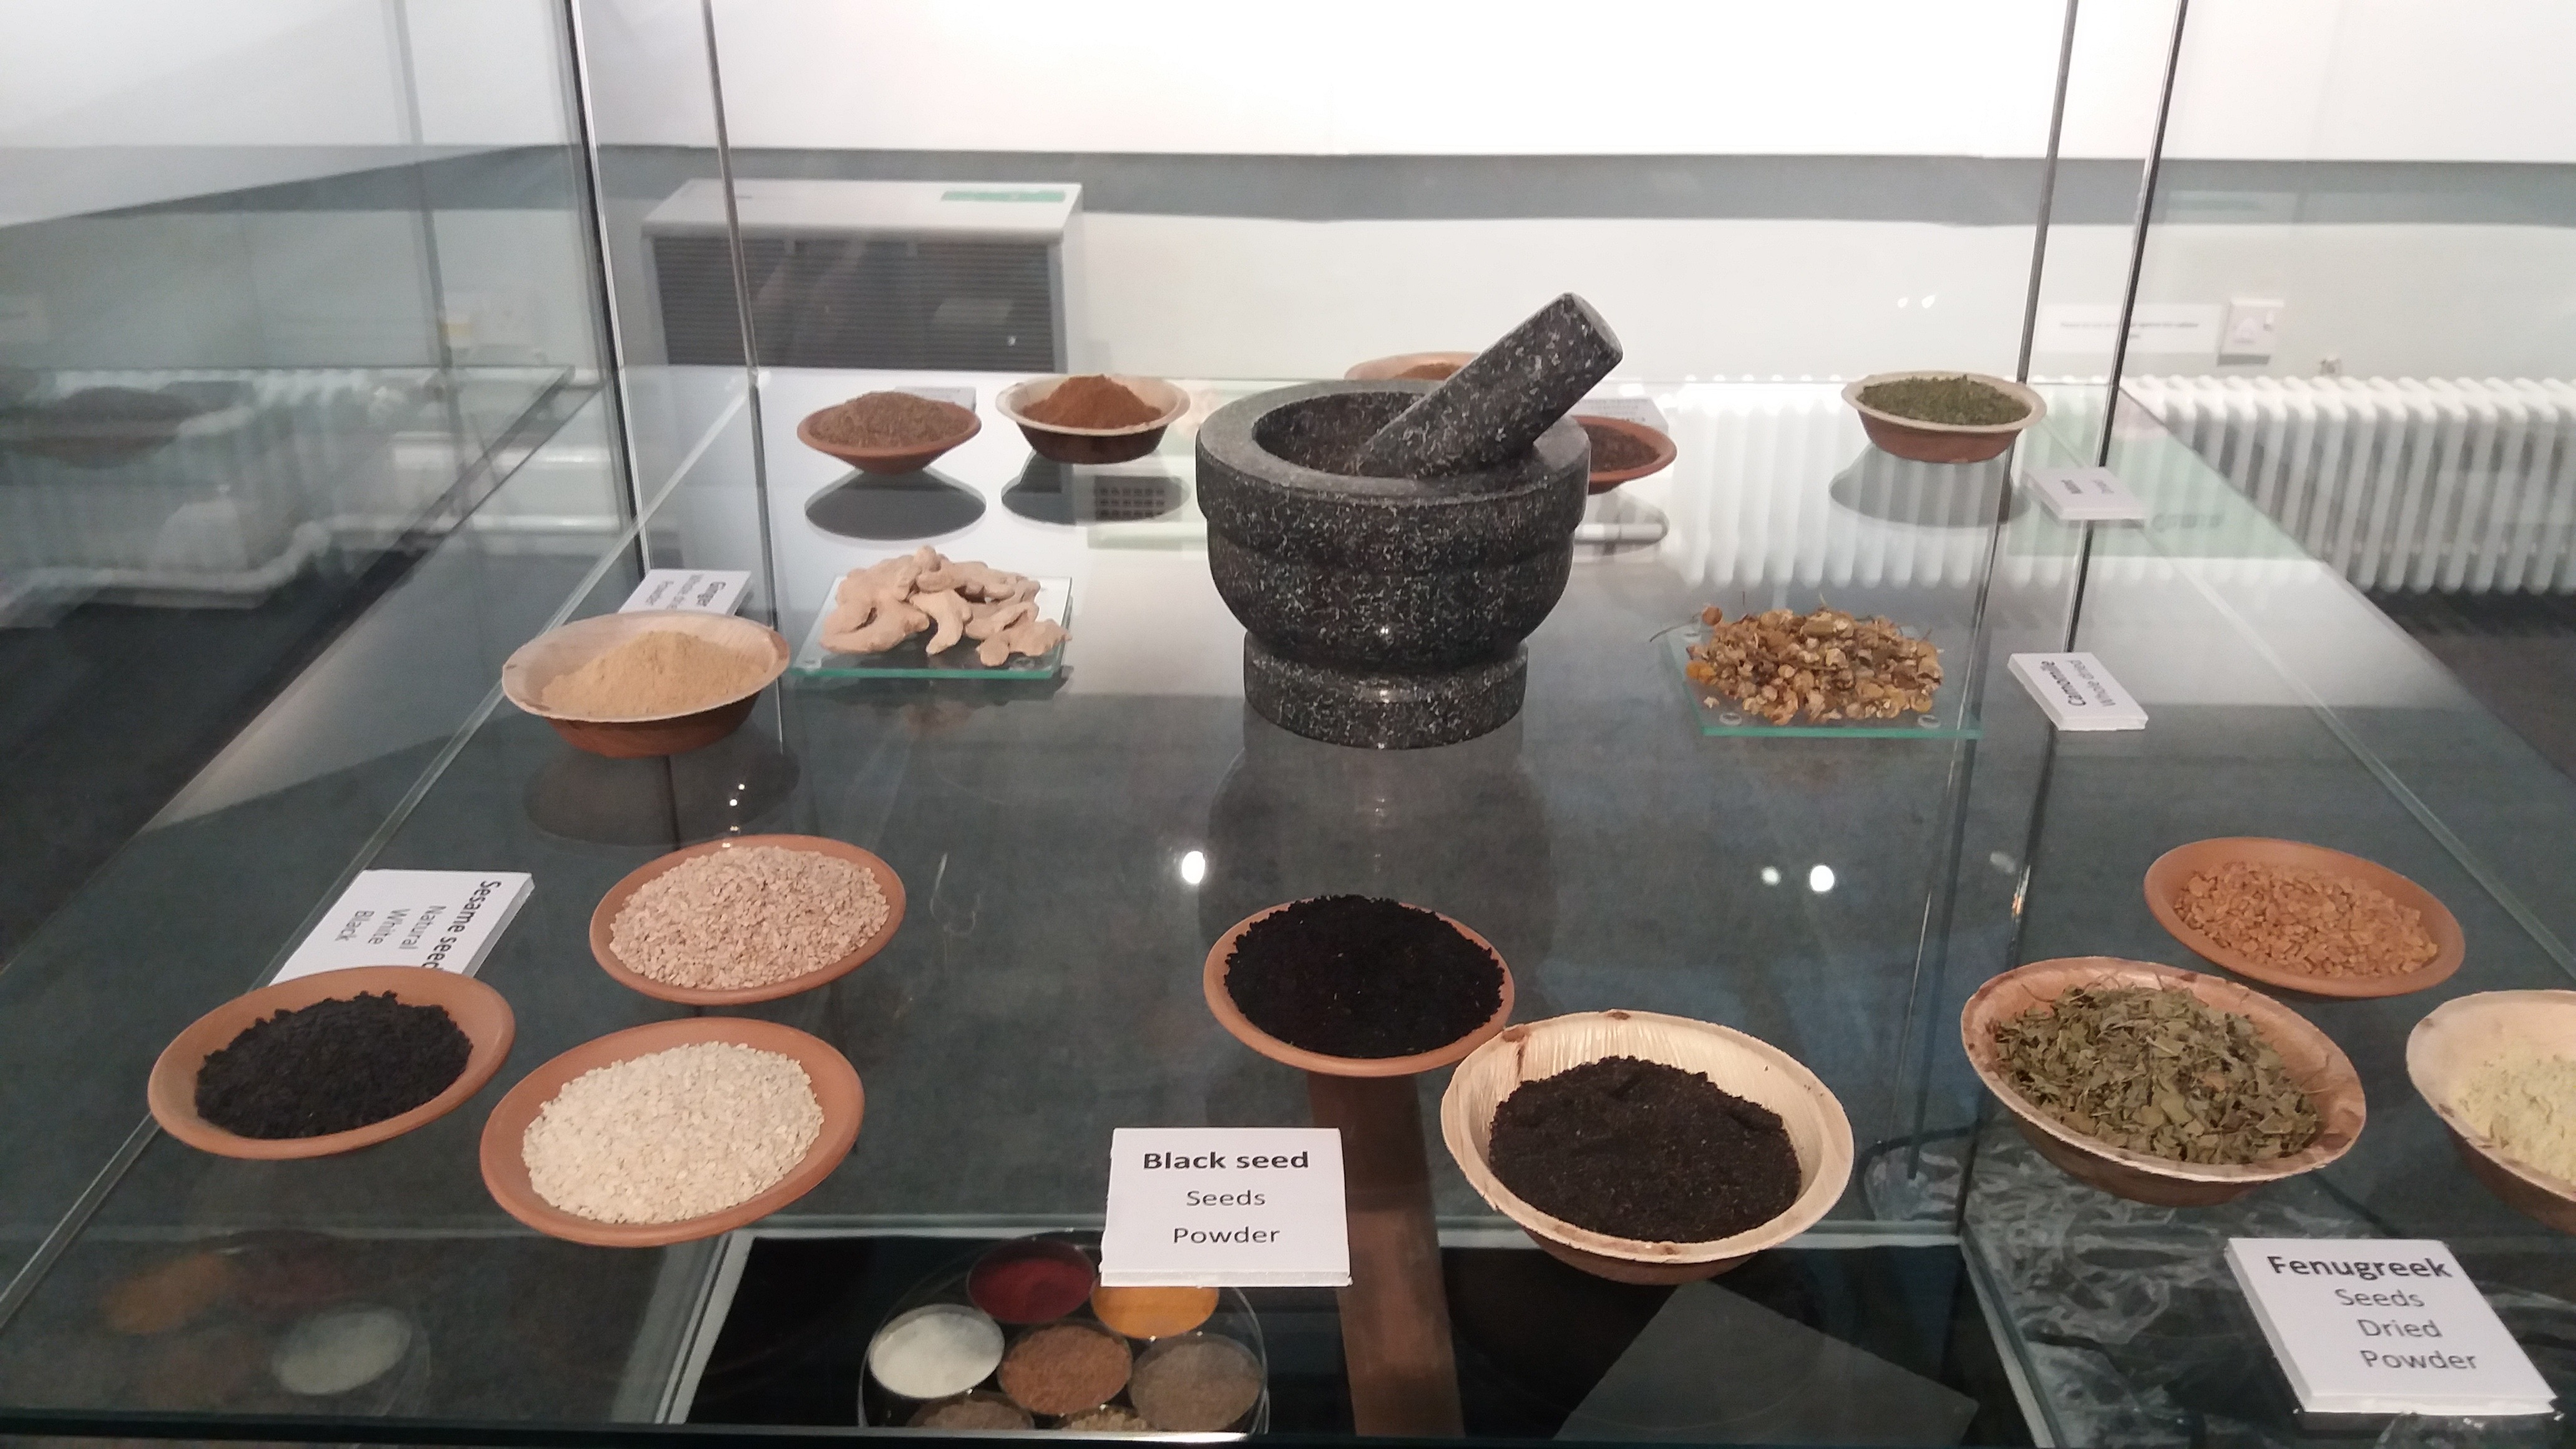 REVIEW: ‘My Spice Box Remedies’ at Kingston Museum